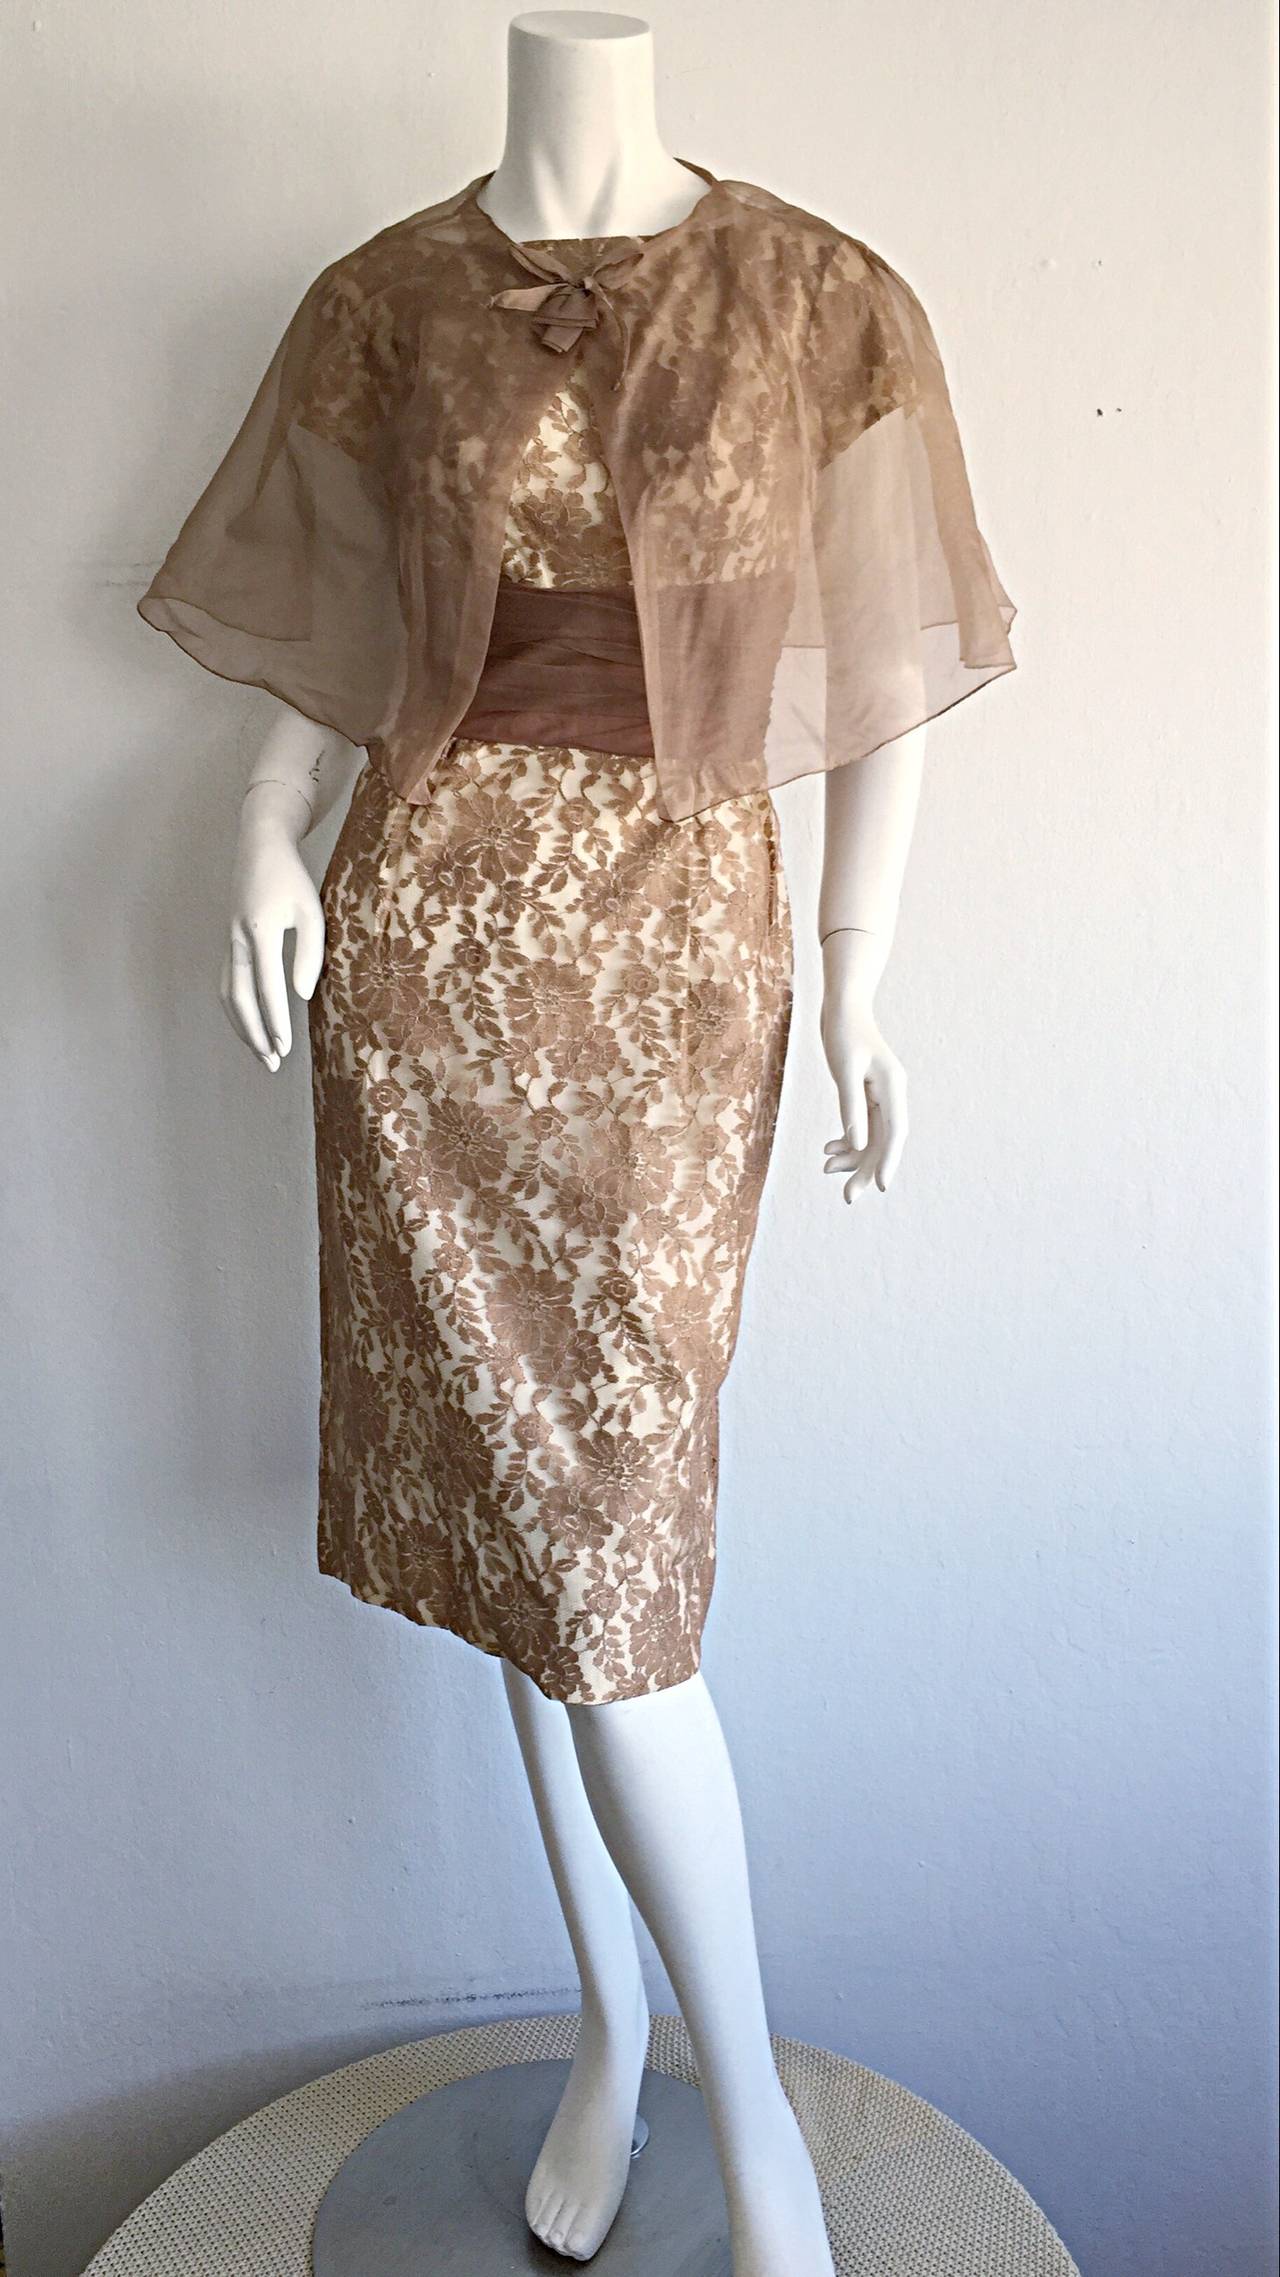 Amazing vintage 1950s Demi Couture French Lace dress and caplet! Wonderful beige/nude/brown color lace, with matching caplet. Impeccable construction, with the majority of the workmanship sewn by hand.  Bombshell fit that can easily transition from